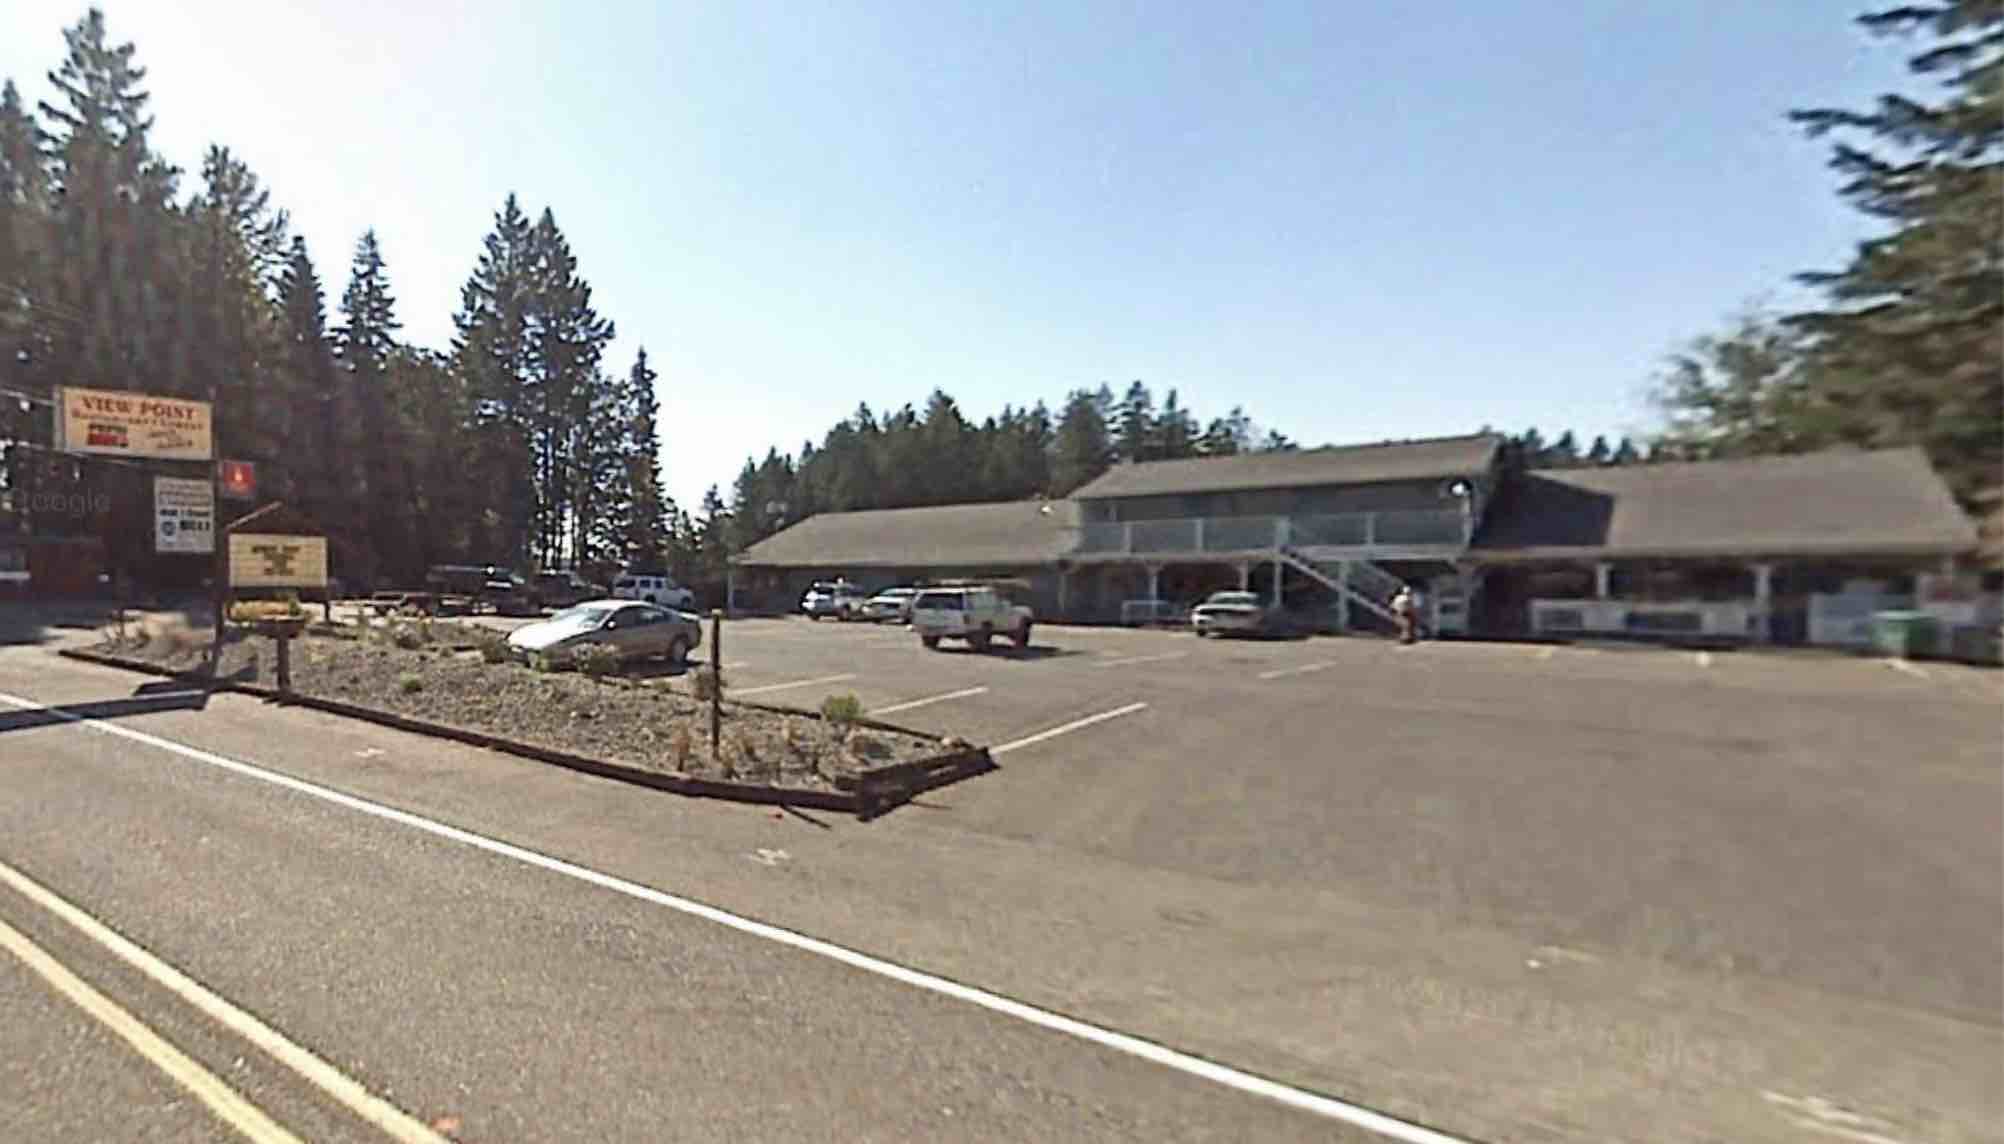 image of Viewpoint Restaurant and McIver Outpost Store courtesy of Google Maps